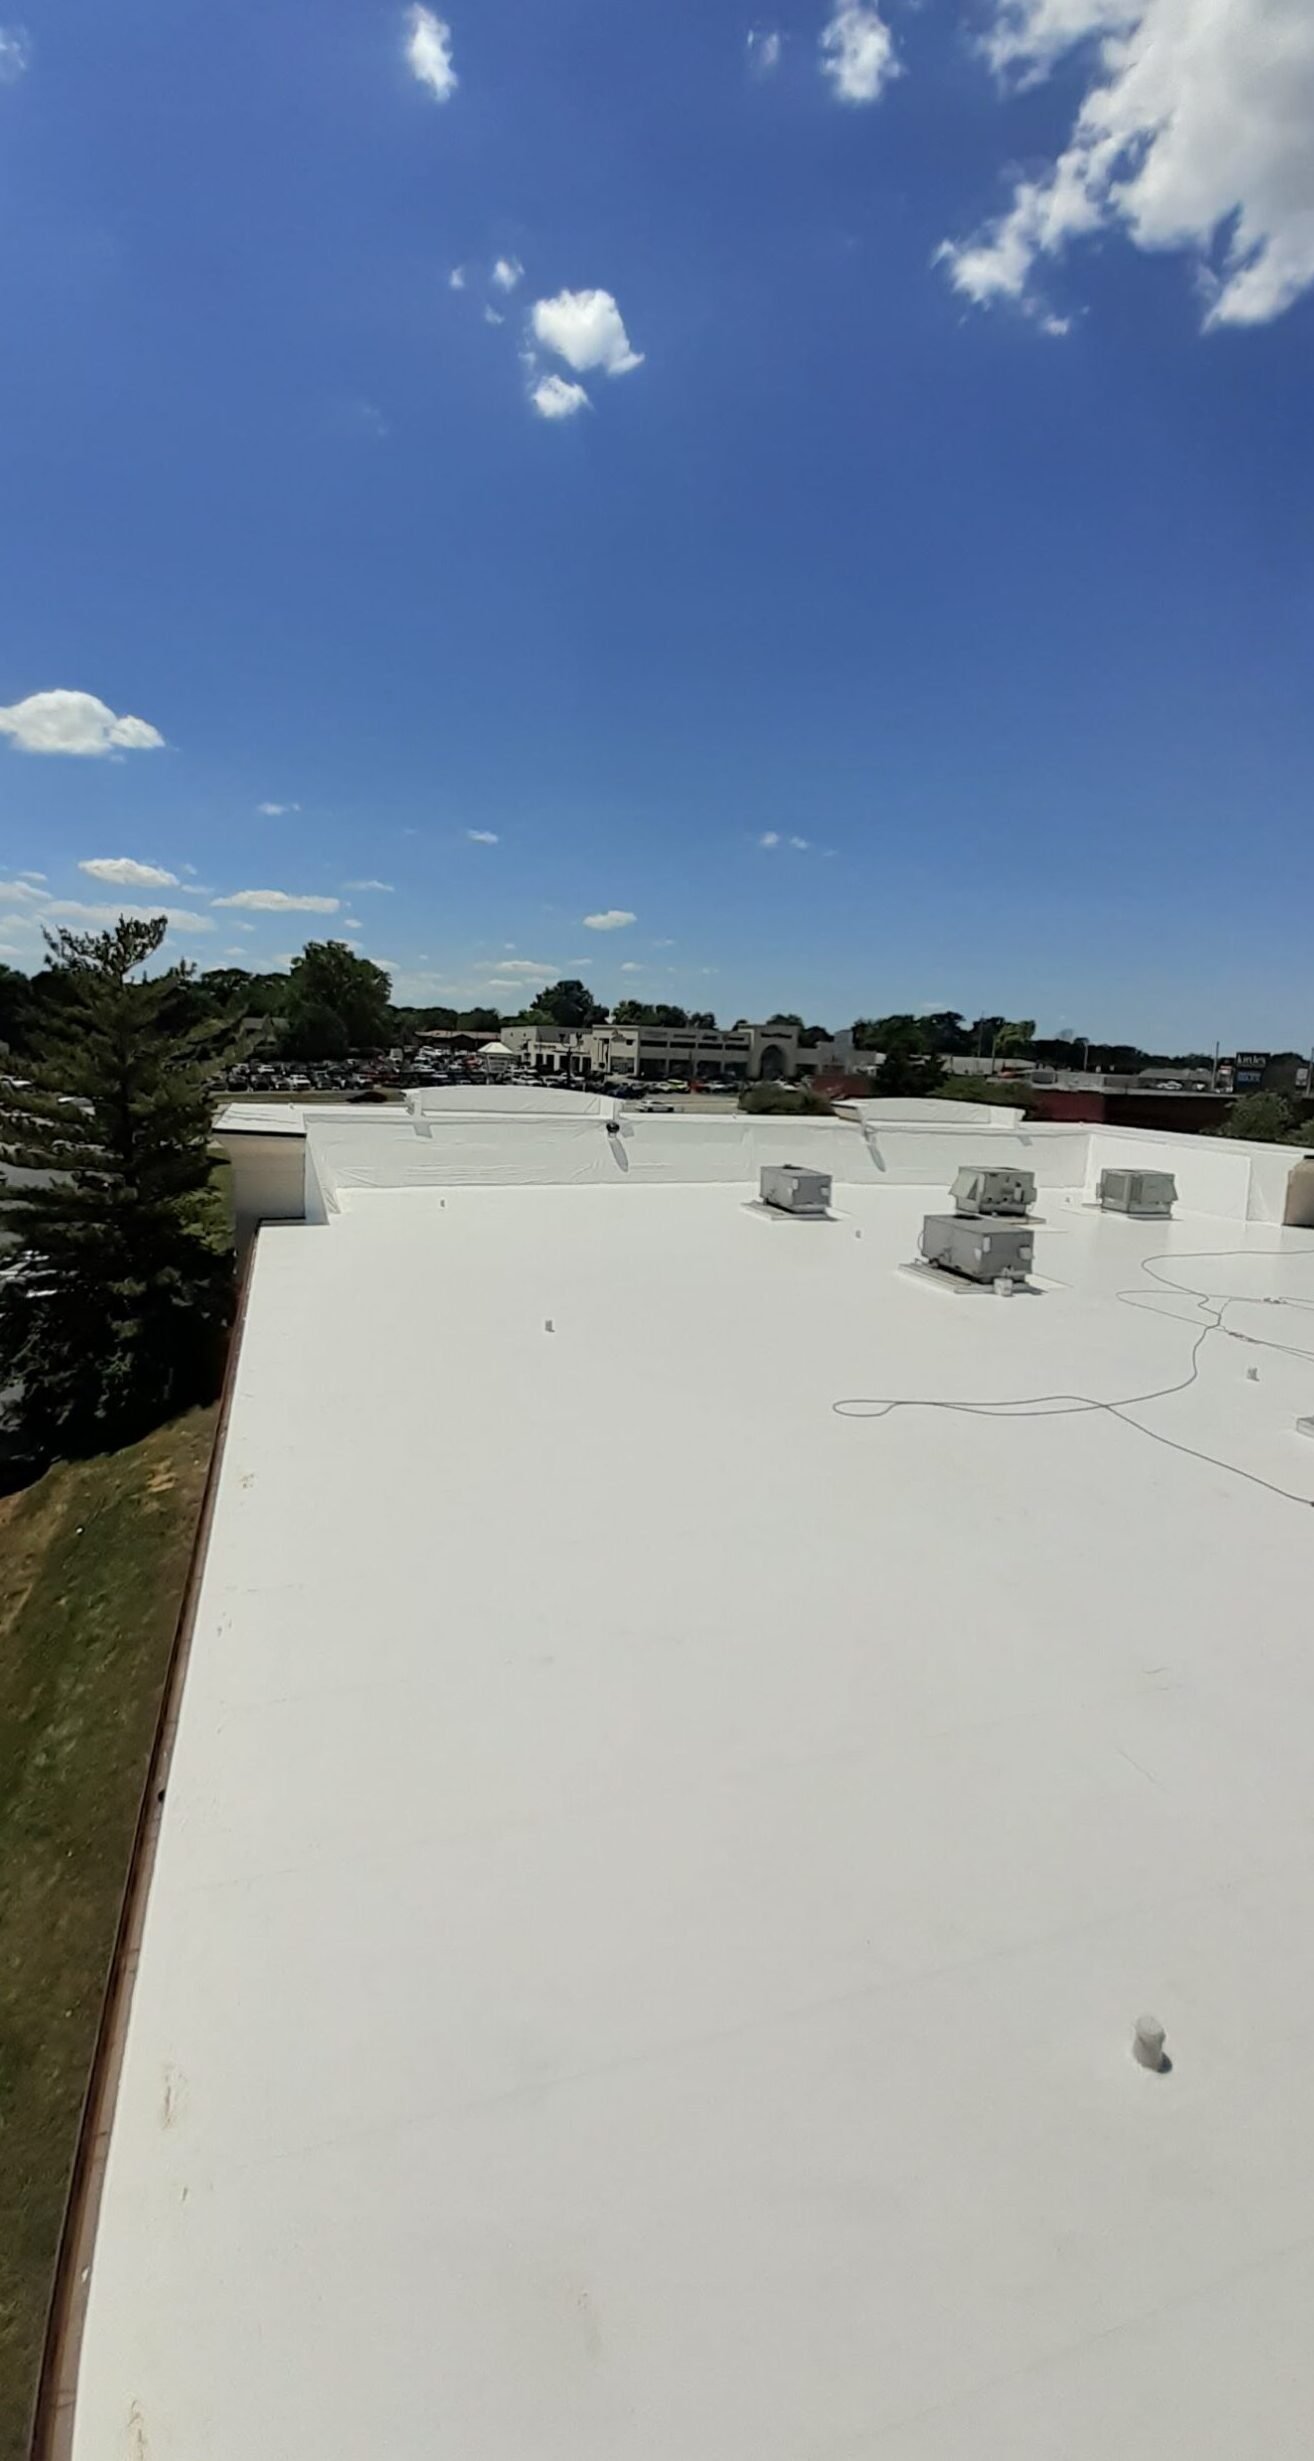 Commercial roofing expertly installed by High Quality Roofing